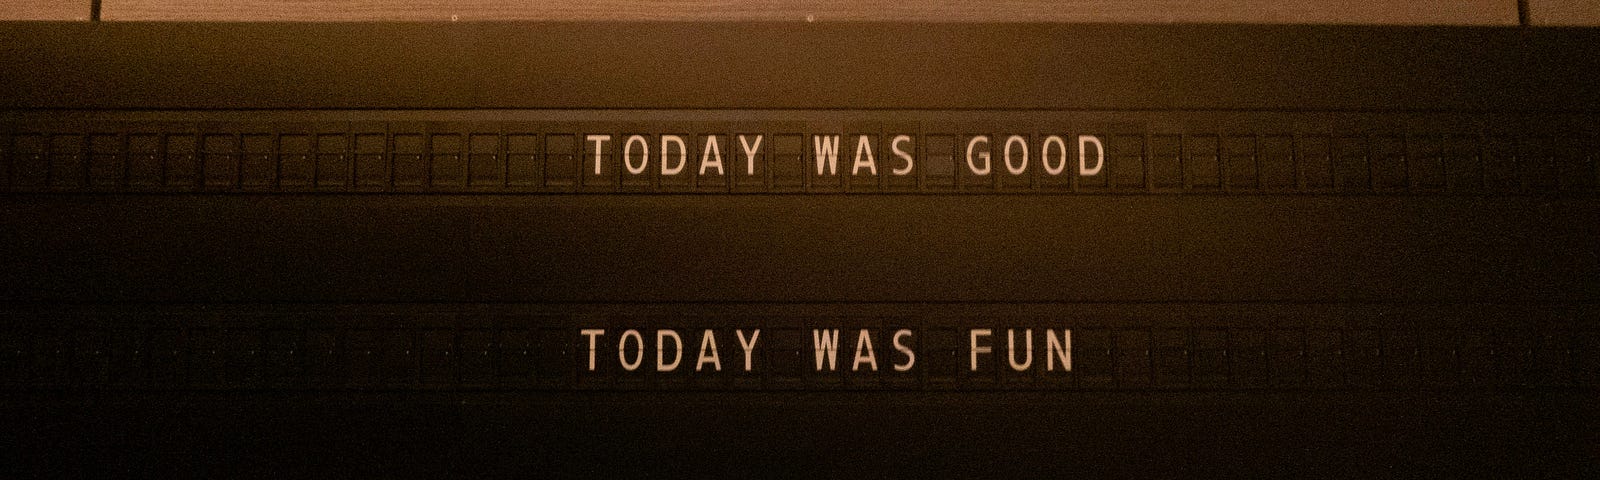 A signboard with 3 lines of text: “TODAY WAS GOOD, TODAY WAS FUN, TOMORROW IS ANOTHER ONE